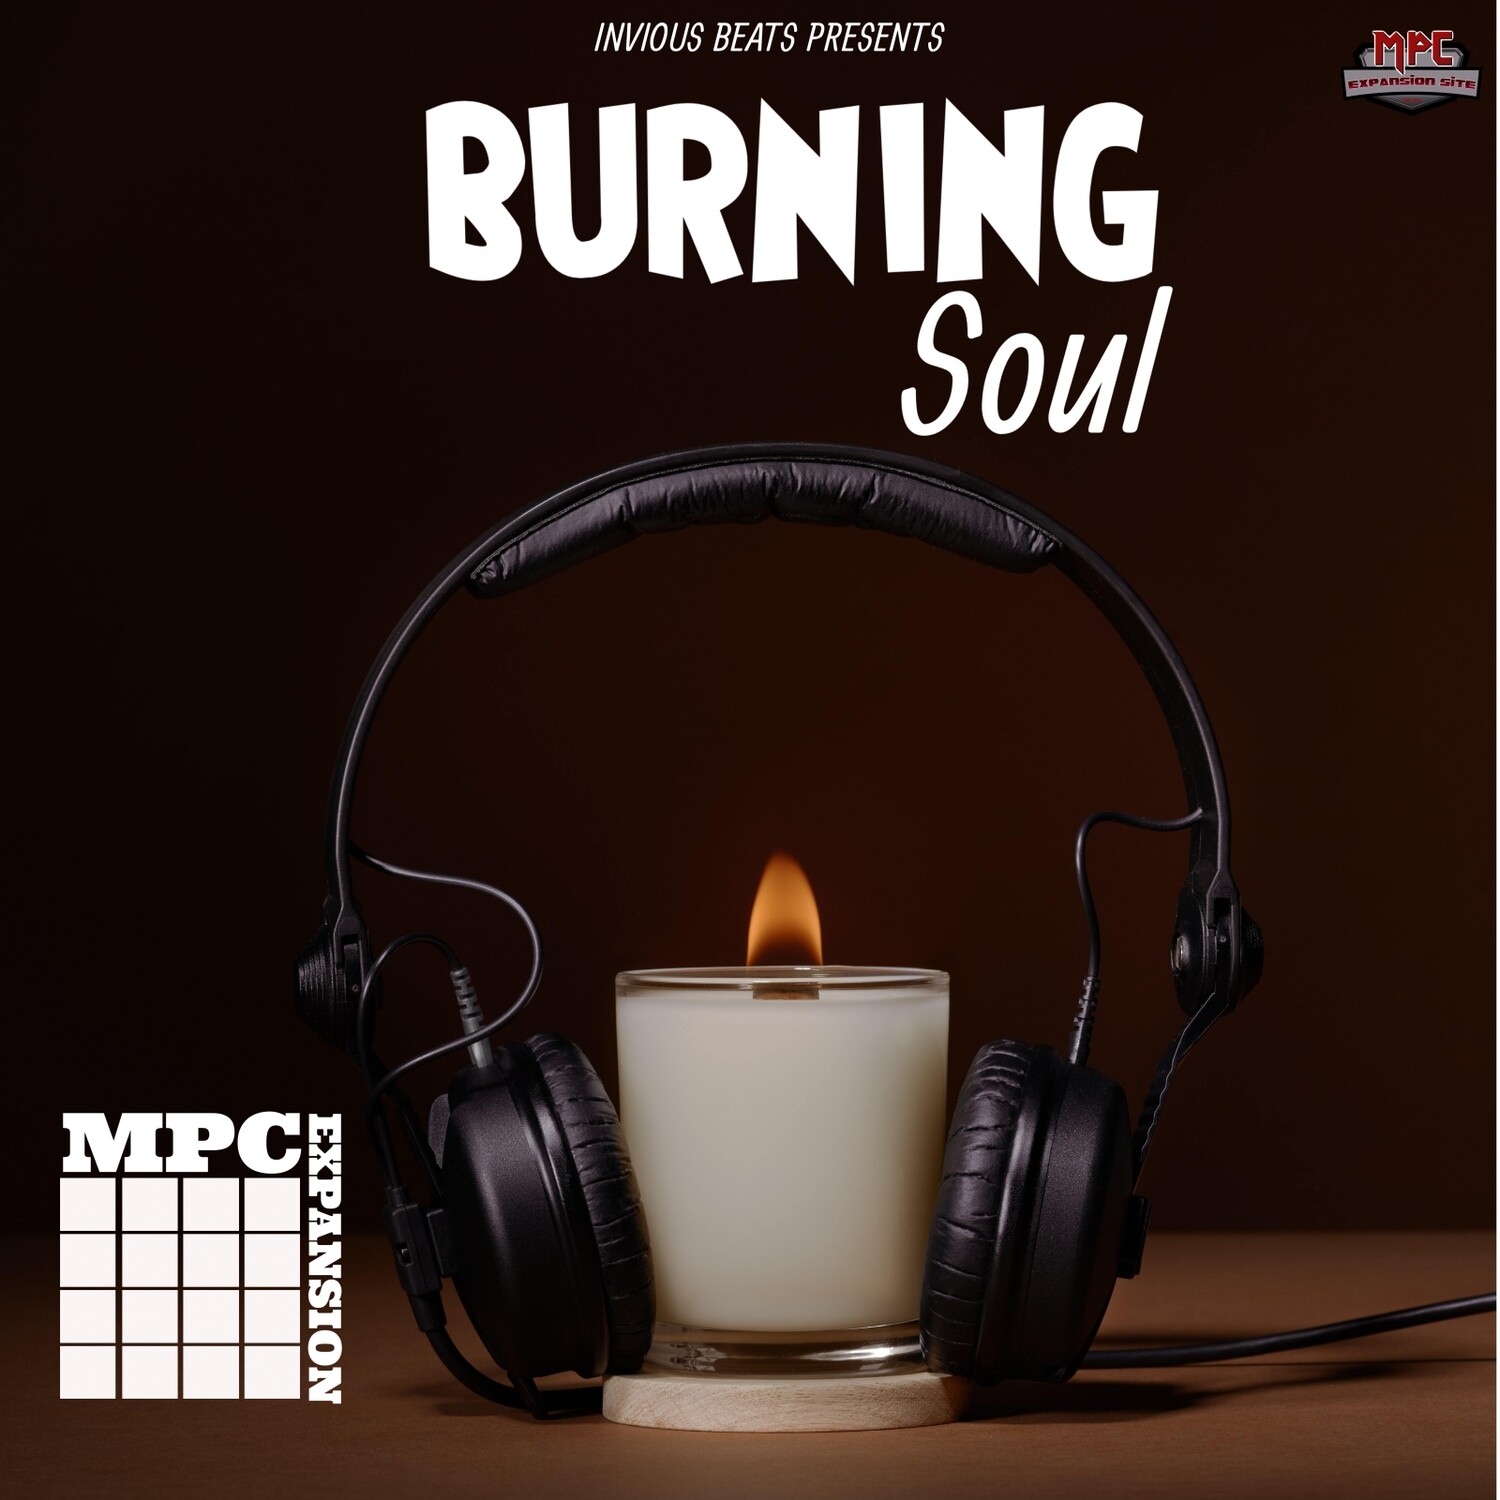 MPC EXPANSION 'BURNING SOUL' by INVIOUS